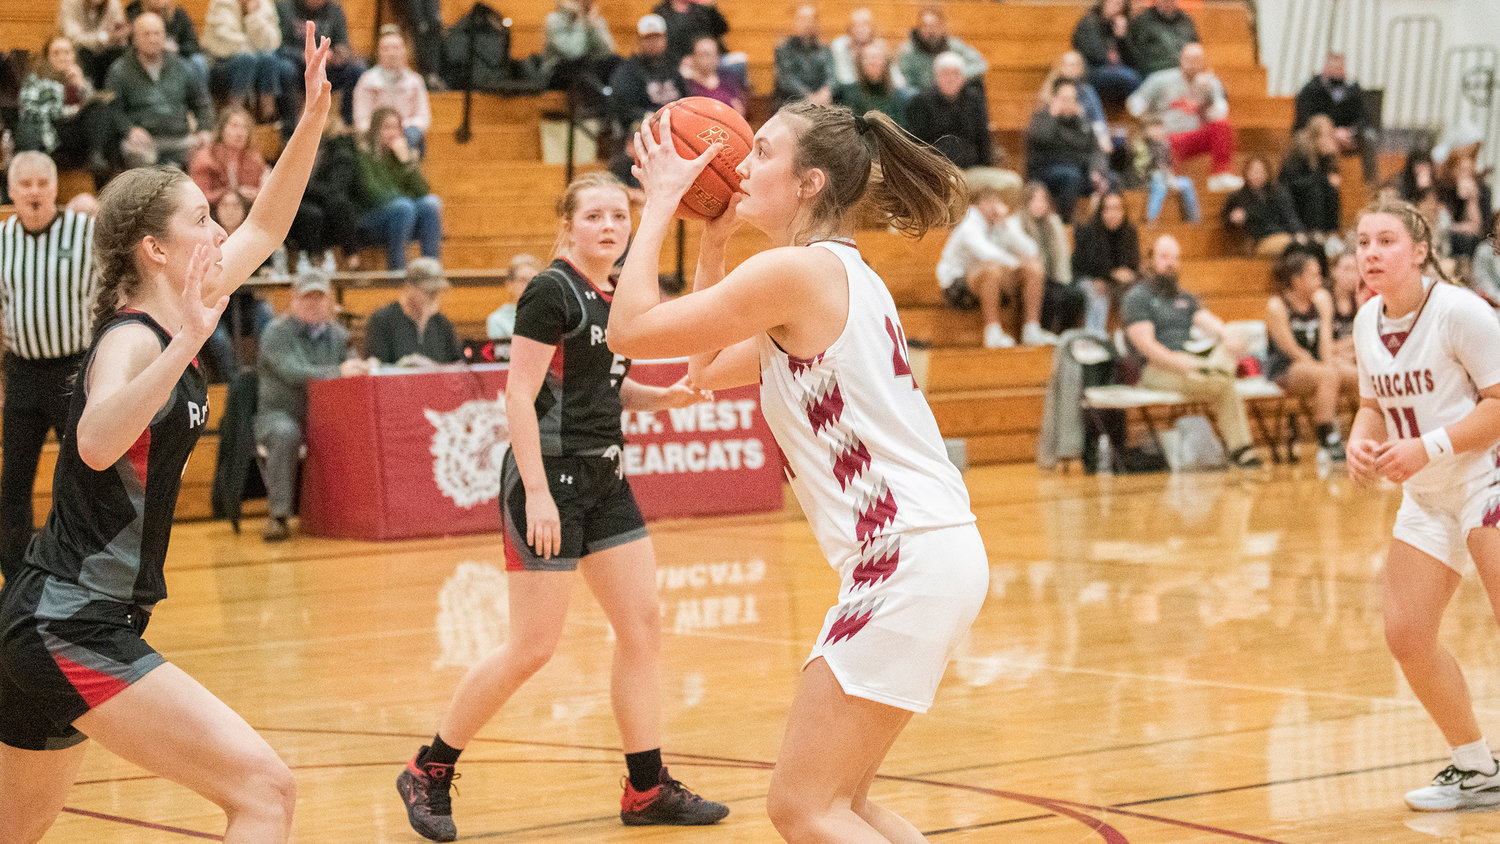 Bearcat sophomore Julia Dalan (44) looks to shoot during a game against R.A. Long Tuesday night in Chehalis.